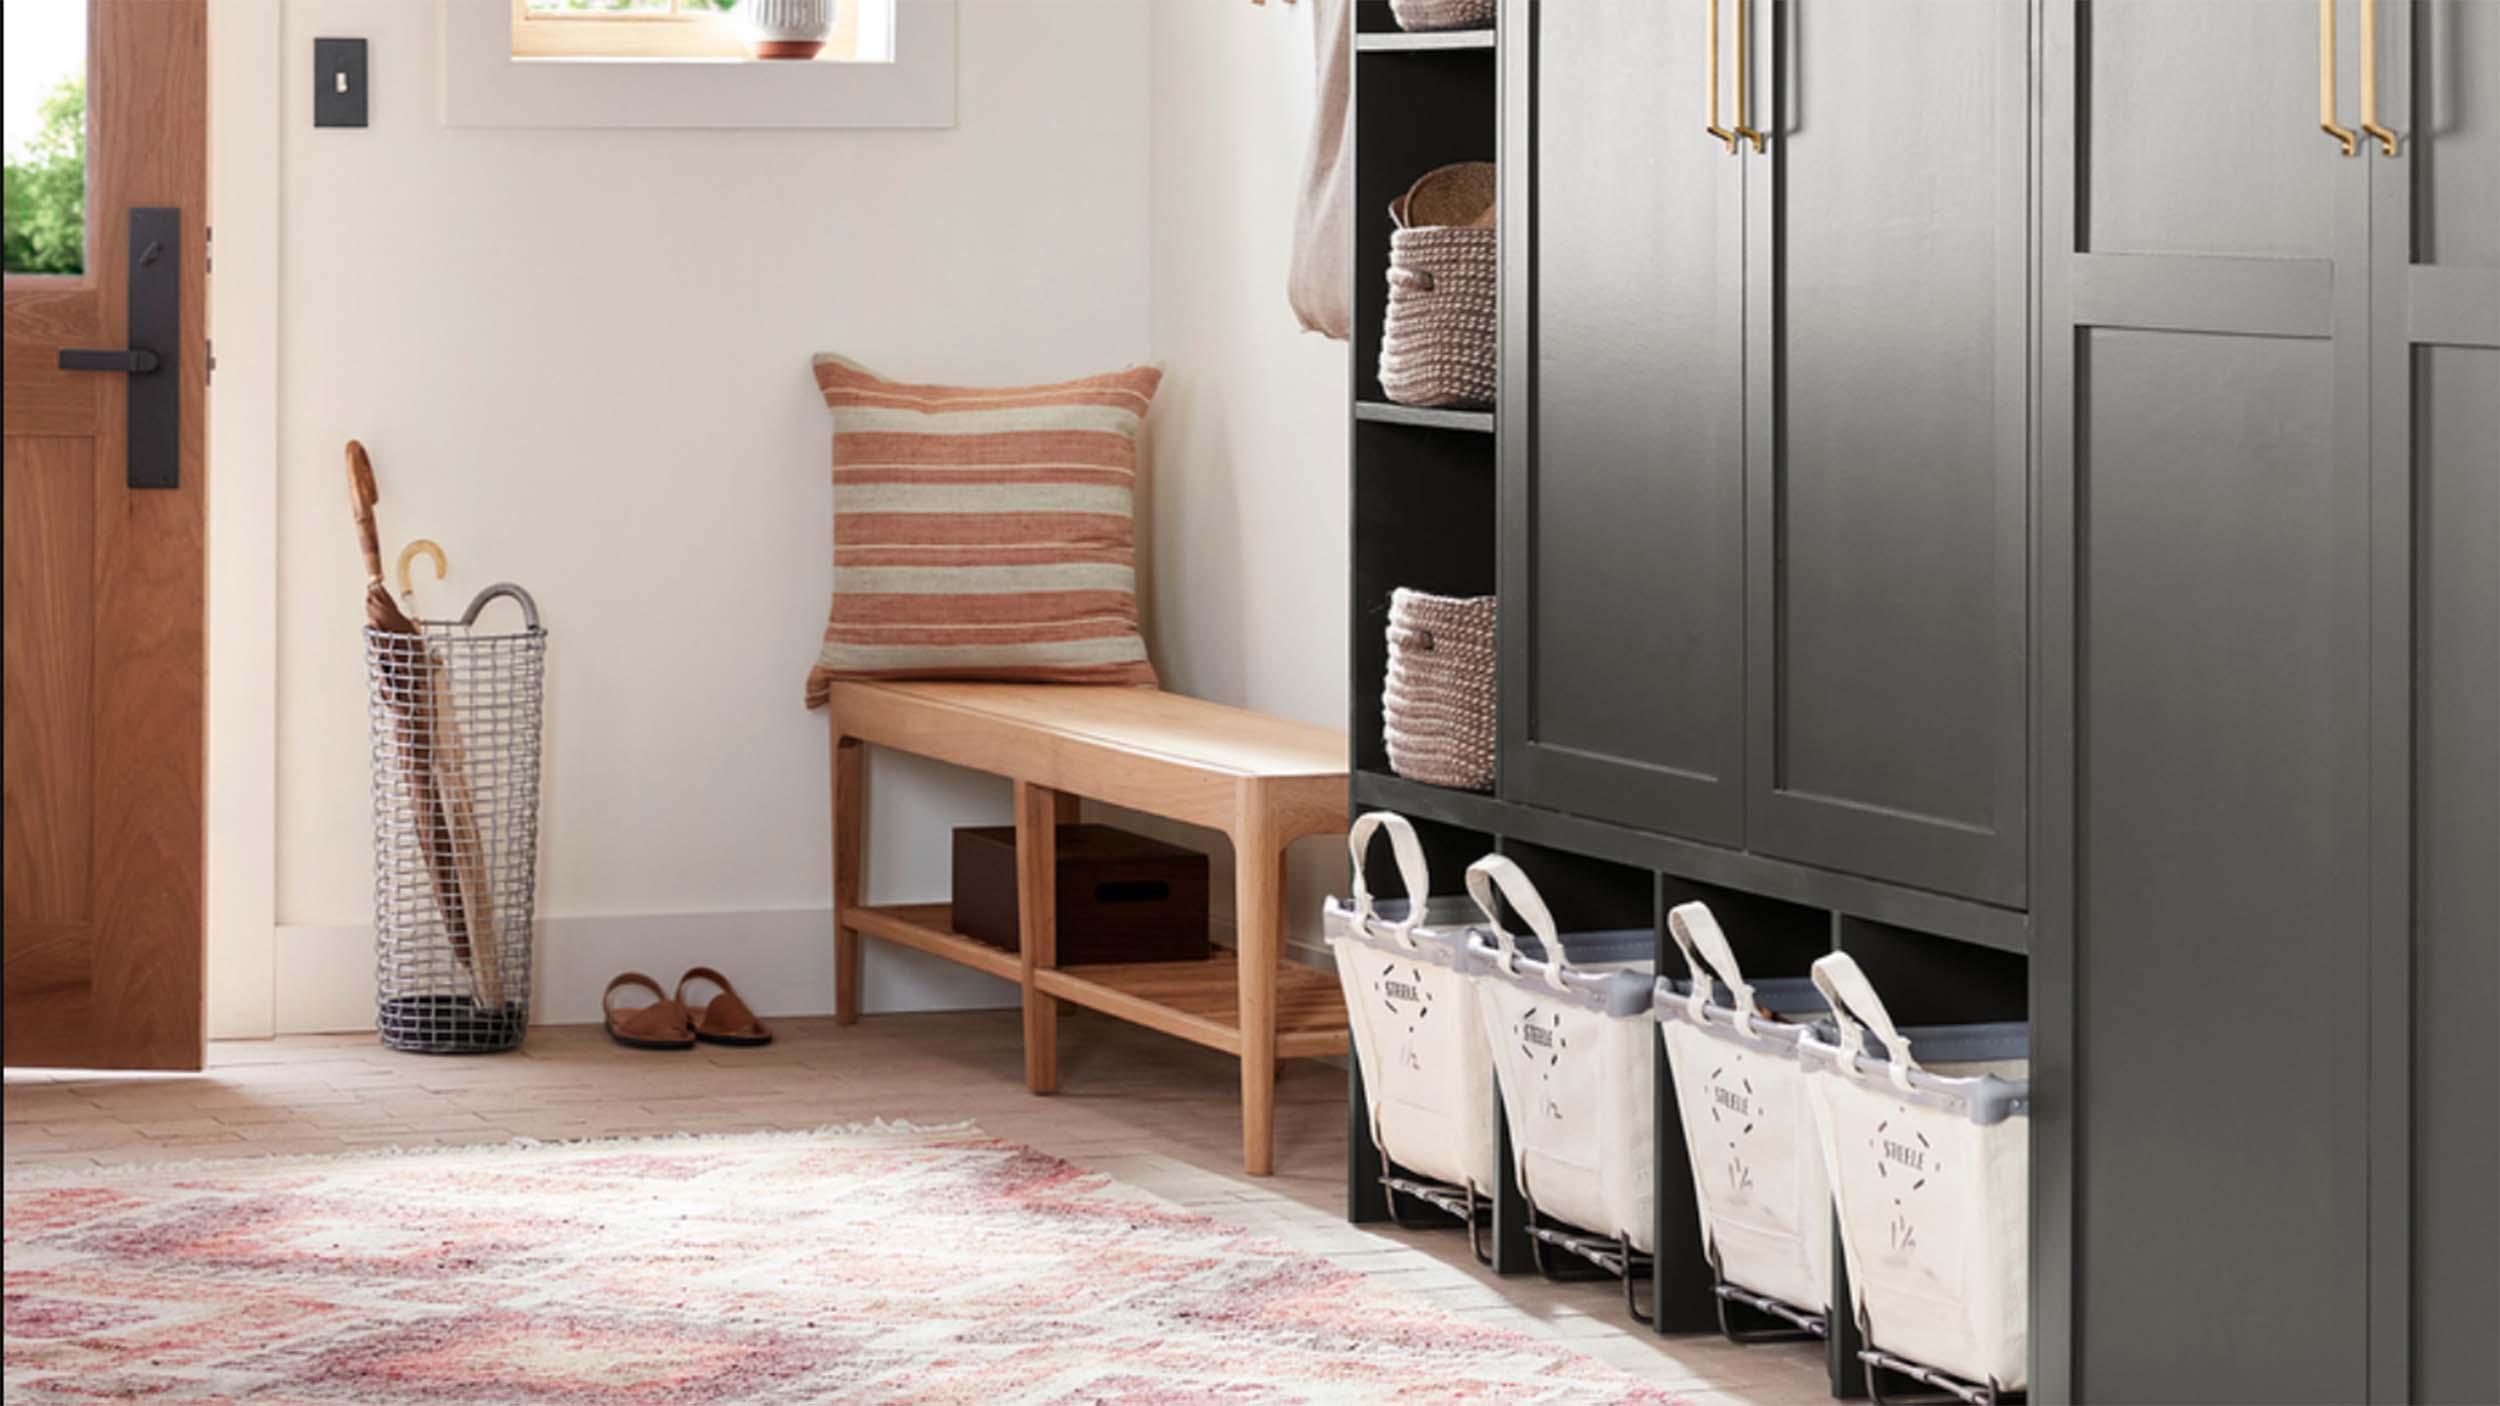 Mudroom Shoe Storage: Pictures, Options, Tips and Ideas